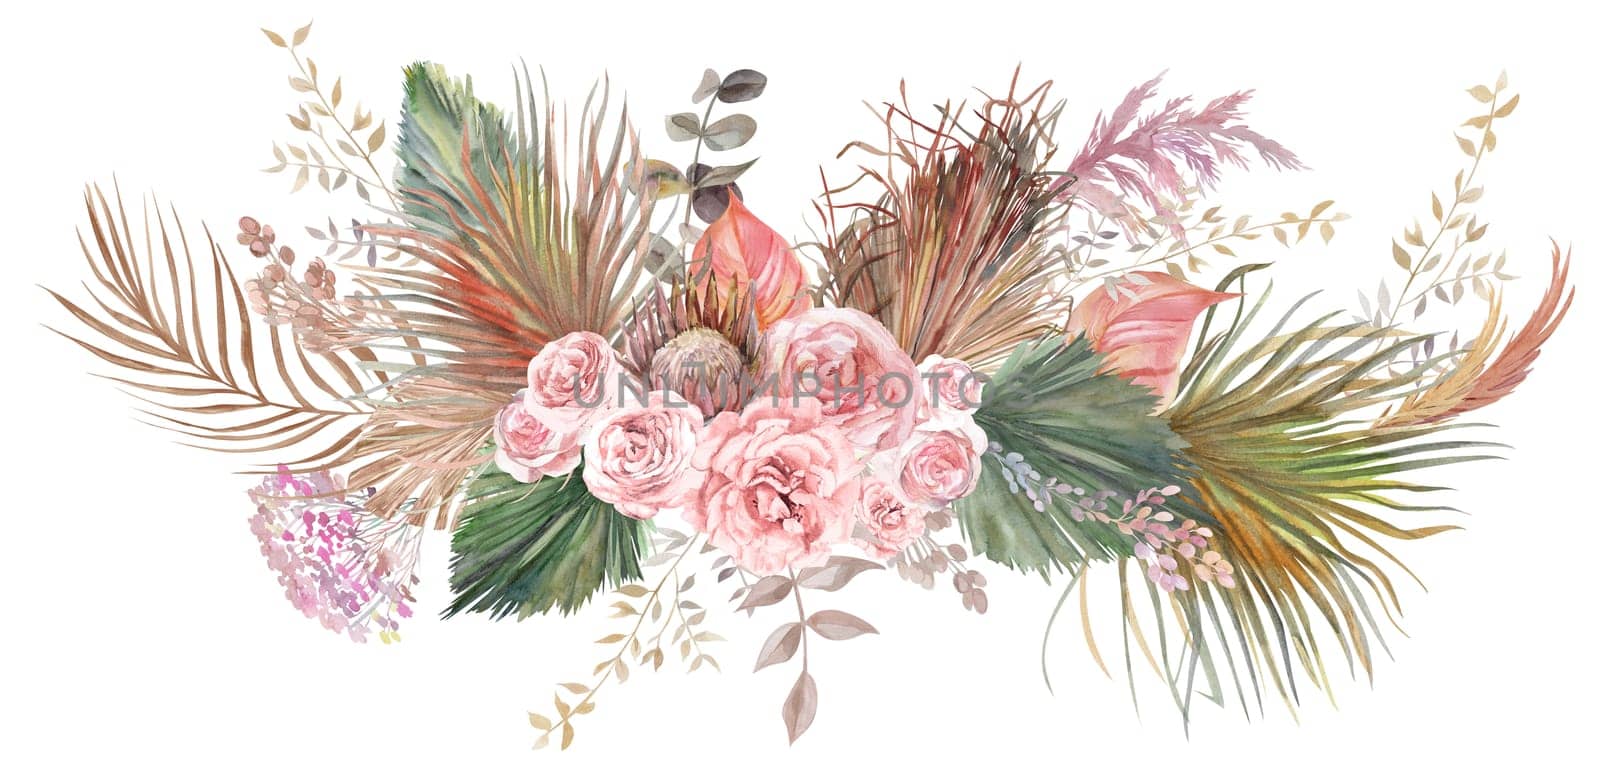 Watercolor horizontal illustration with a bouquet of flowers from light roses and dried flowers of pampas grass